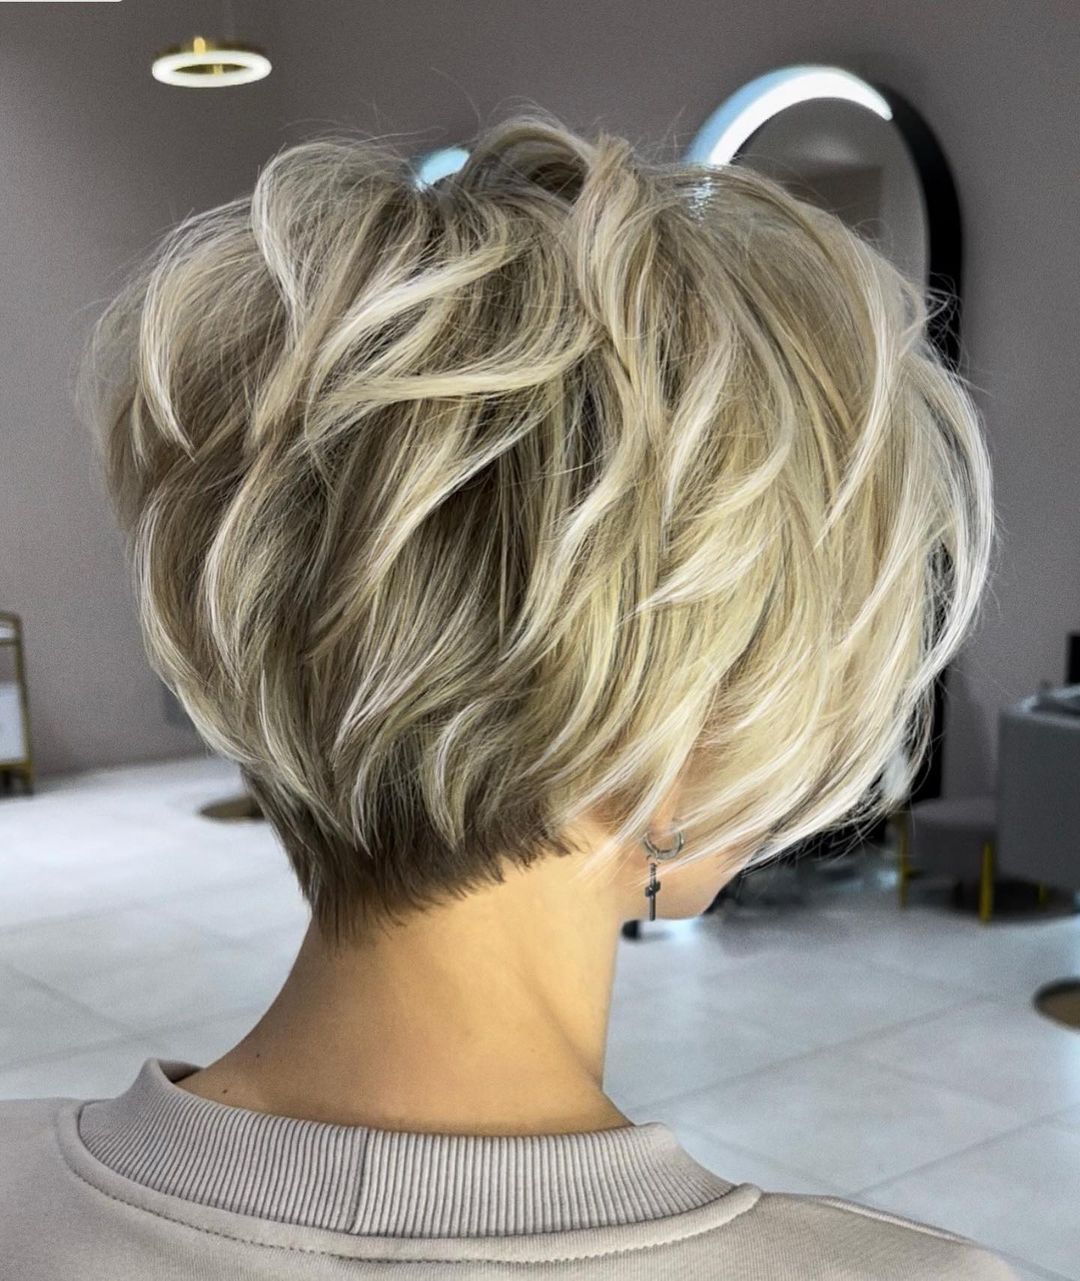 Blonde bob haircuts: 16 spectacular and fashionable examples